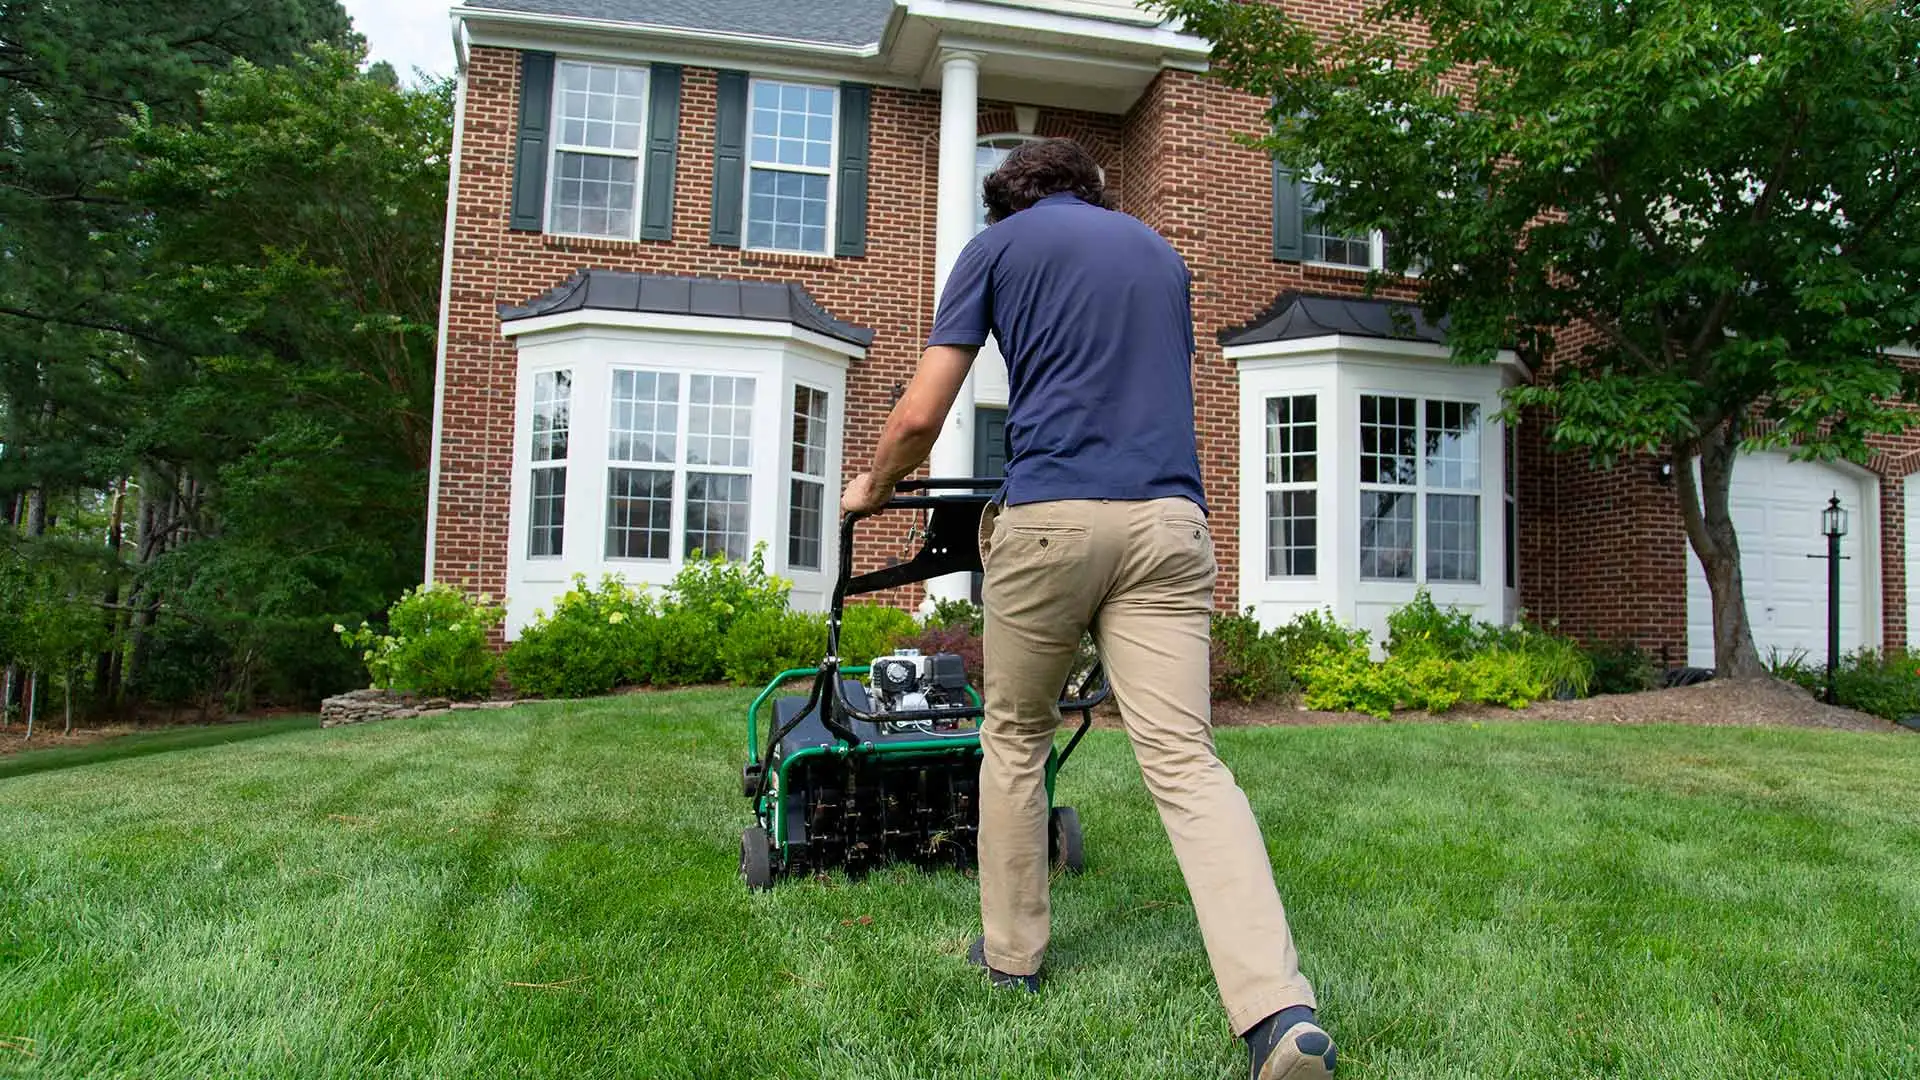 Man using an aeration machine to aerate a lawn with a home in the background.